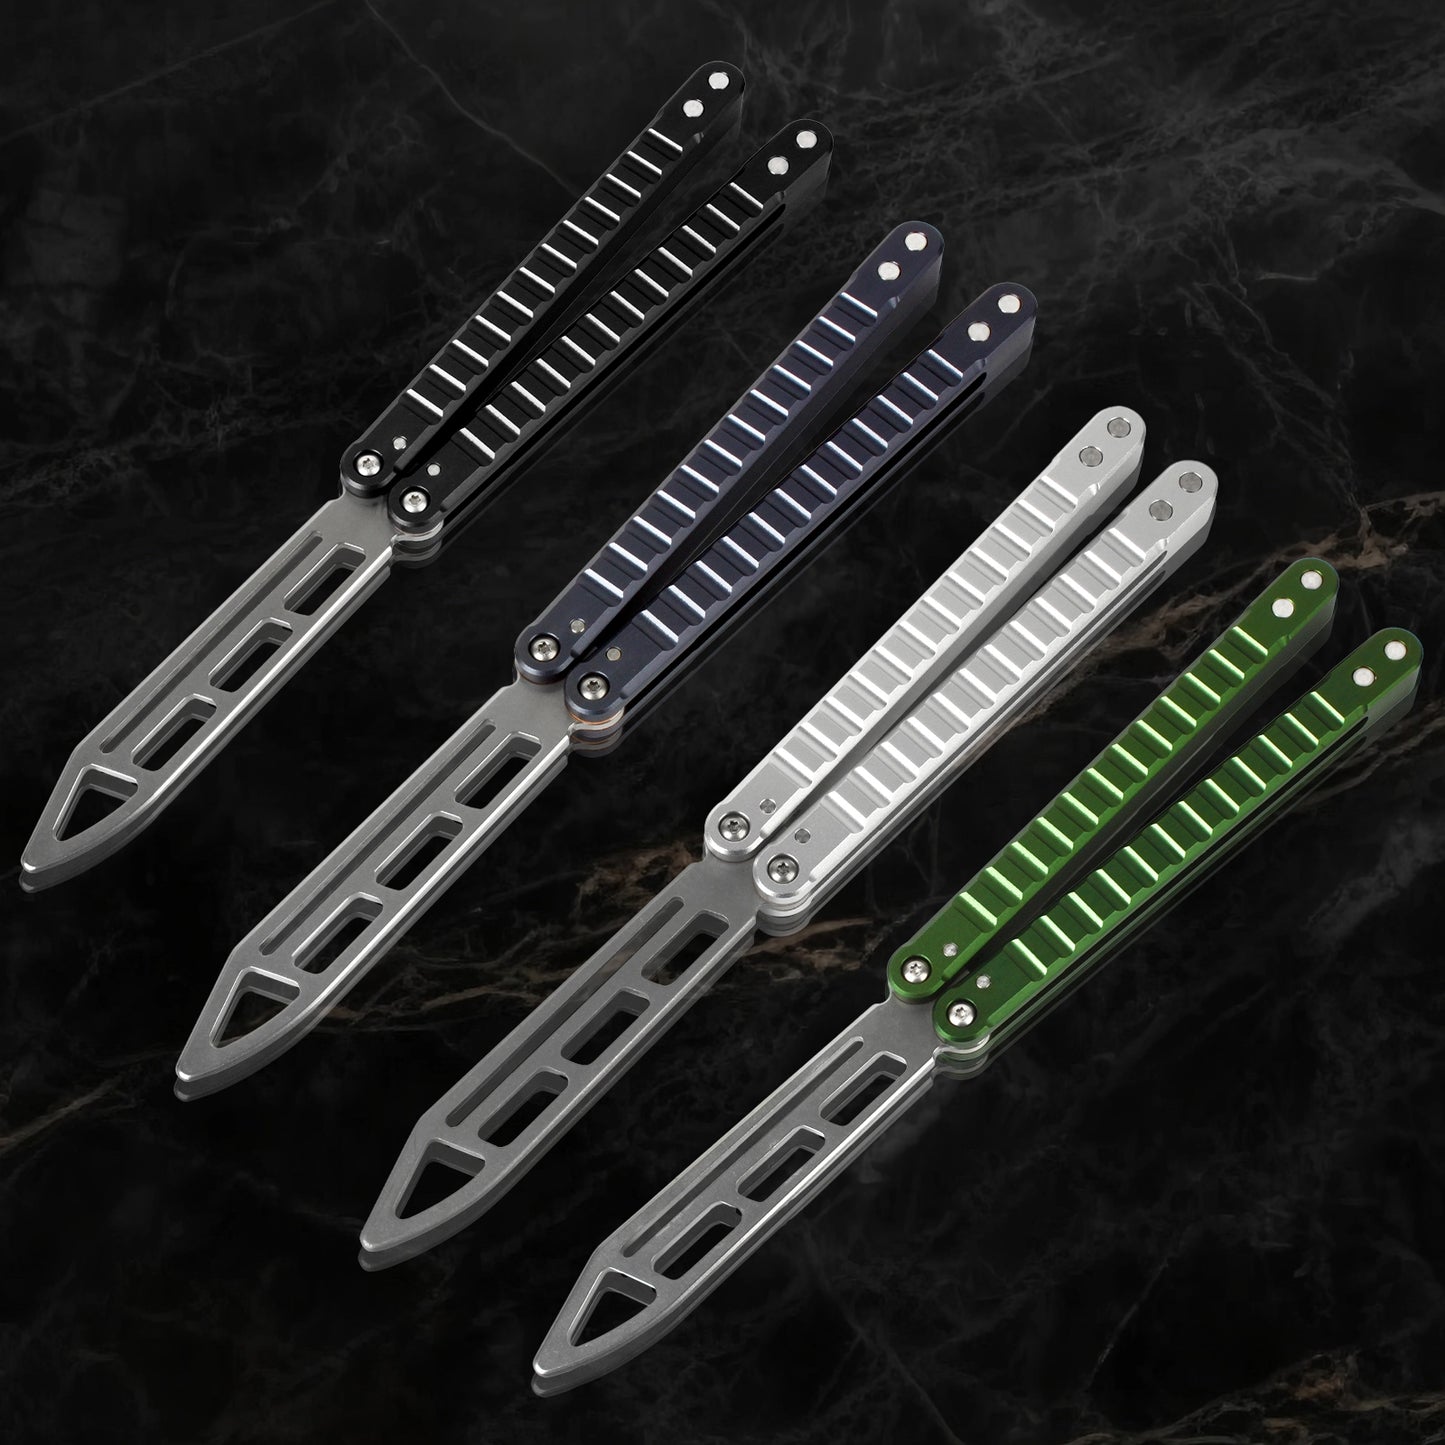 Andux Balisong Butterfly Knife CNC 7075 Aluminum Handle Effective Bushing System Lock Free